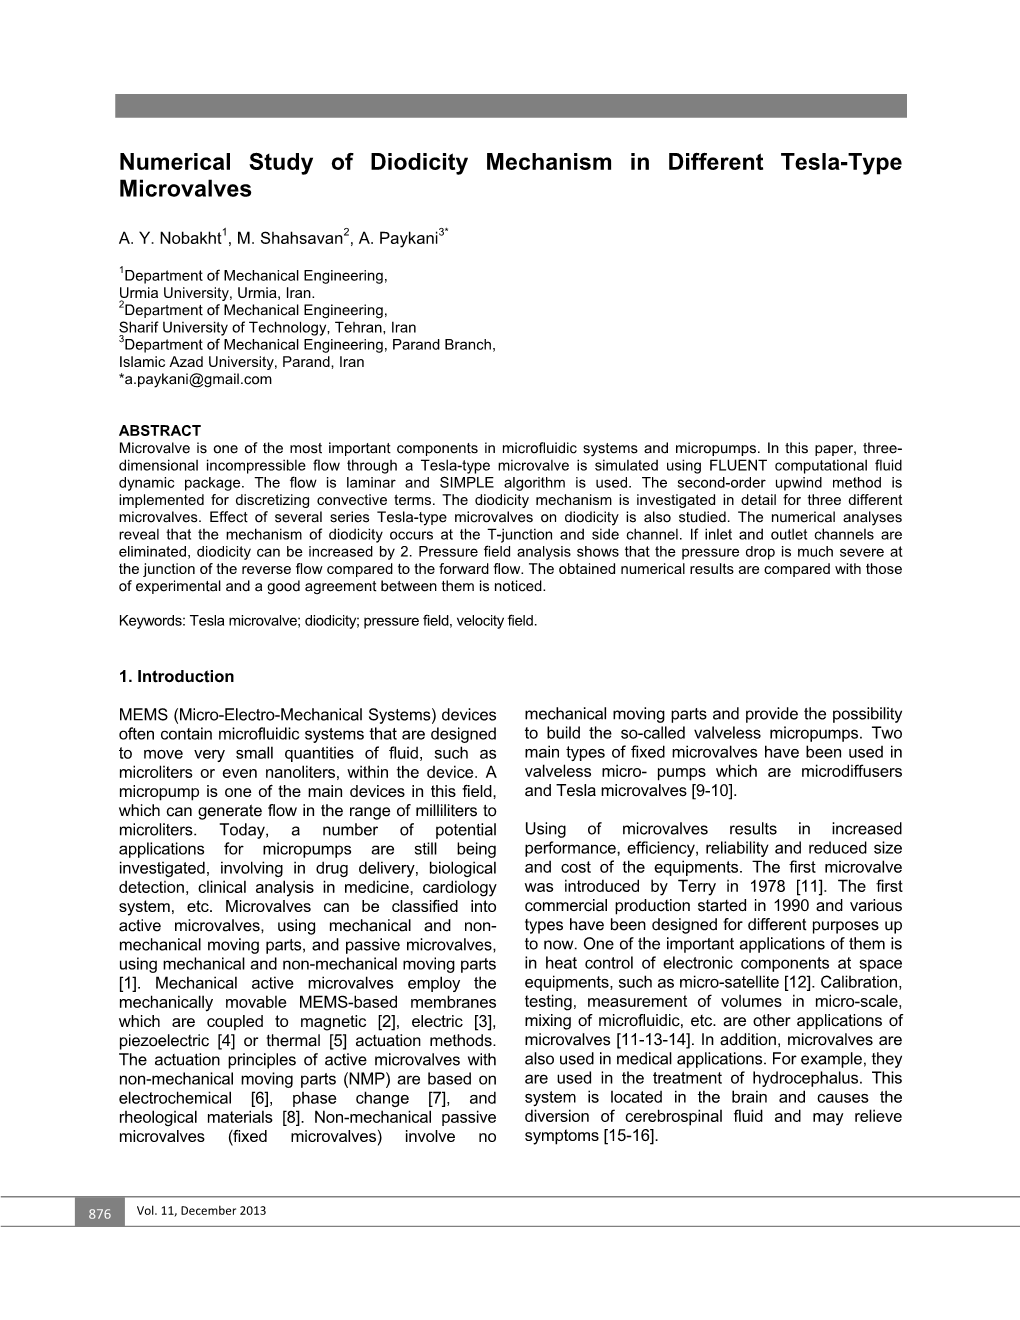 Numerical Study of Diodicity Mechanism in Different Tesla-Type Microvalves